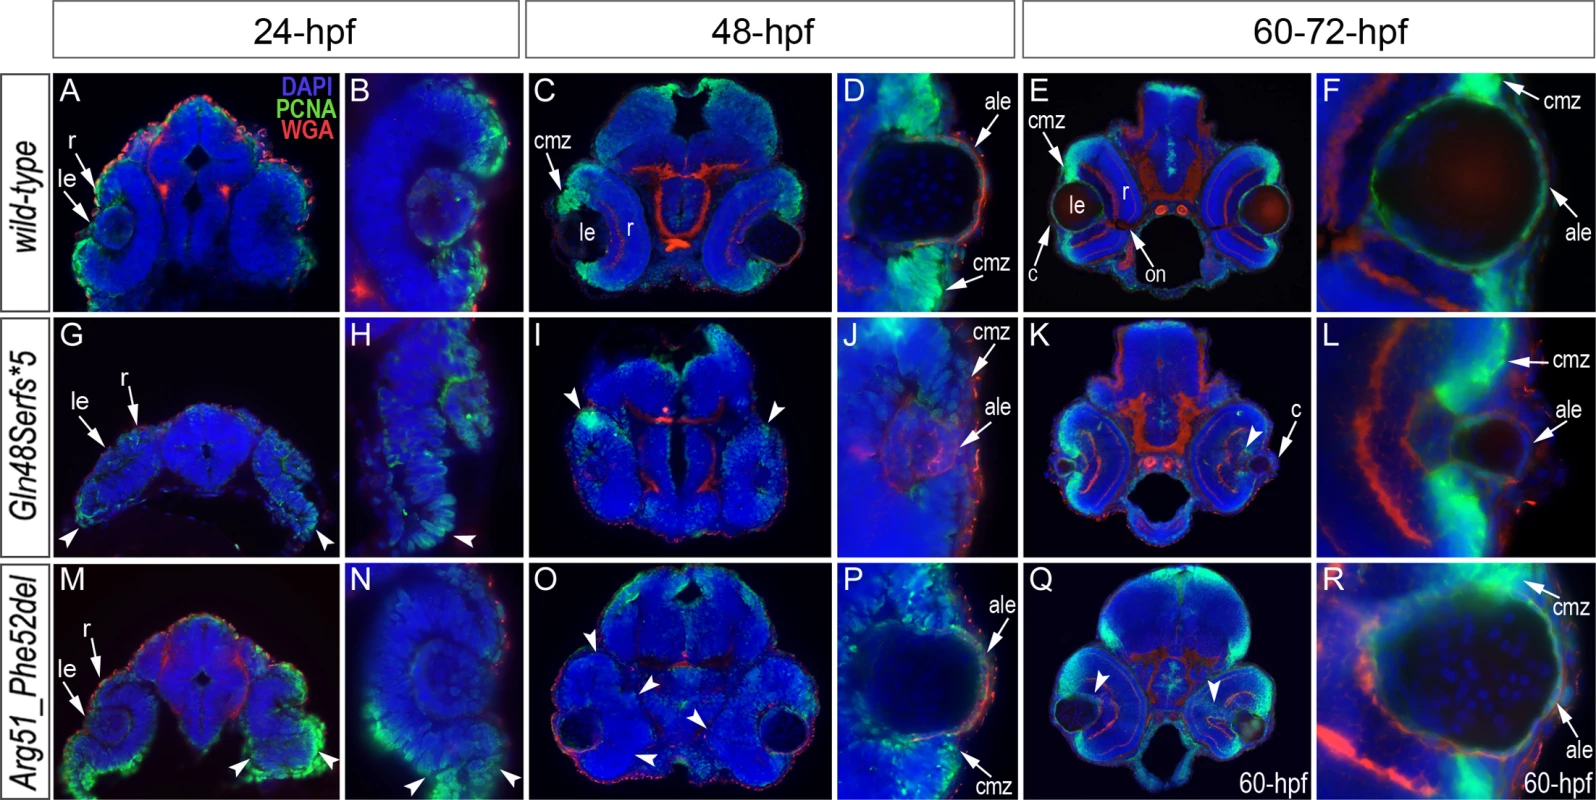 Analysis of proliferation patterns and differentiation markers in wild-type and mutant embryos.